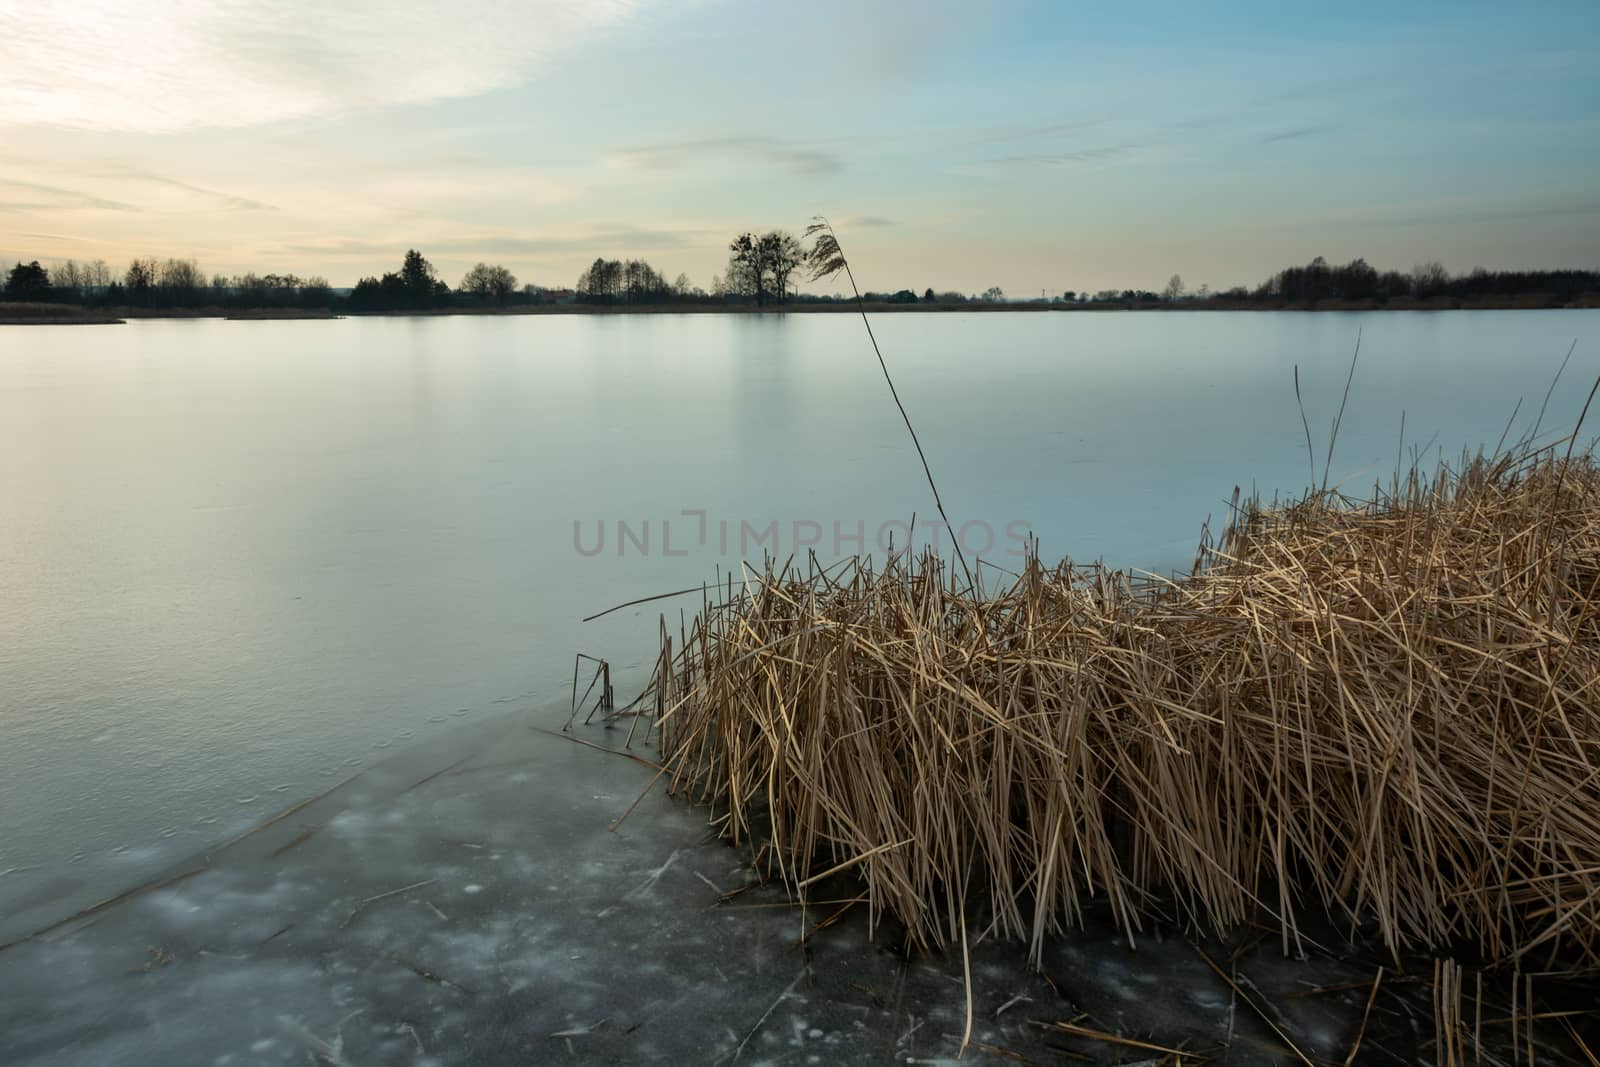 Dry reeds in a frozen lake, winter view by darekb22